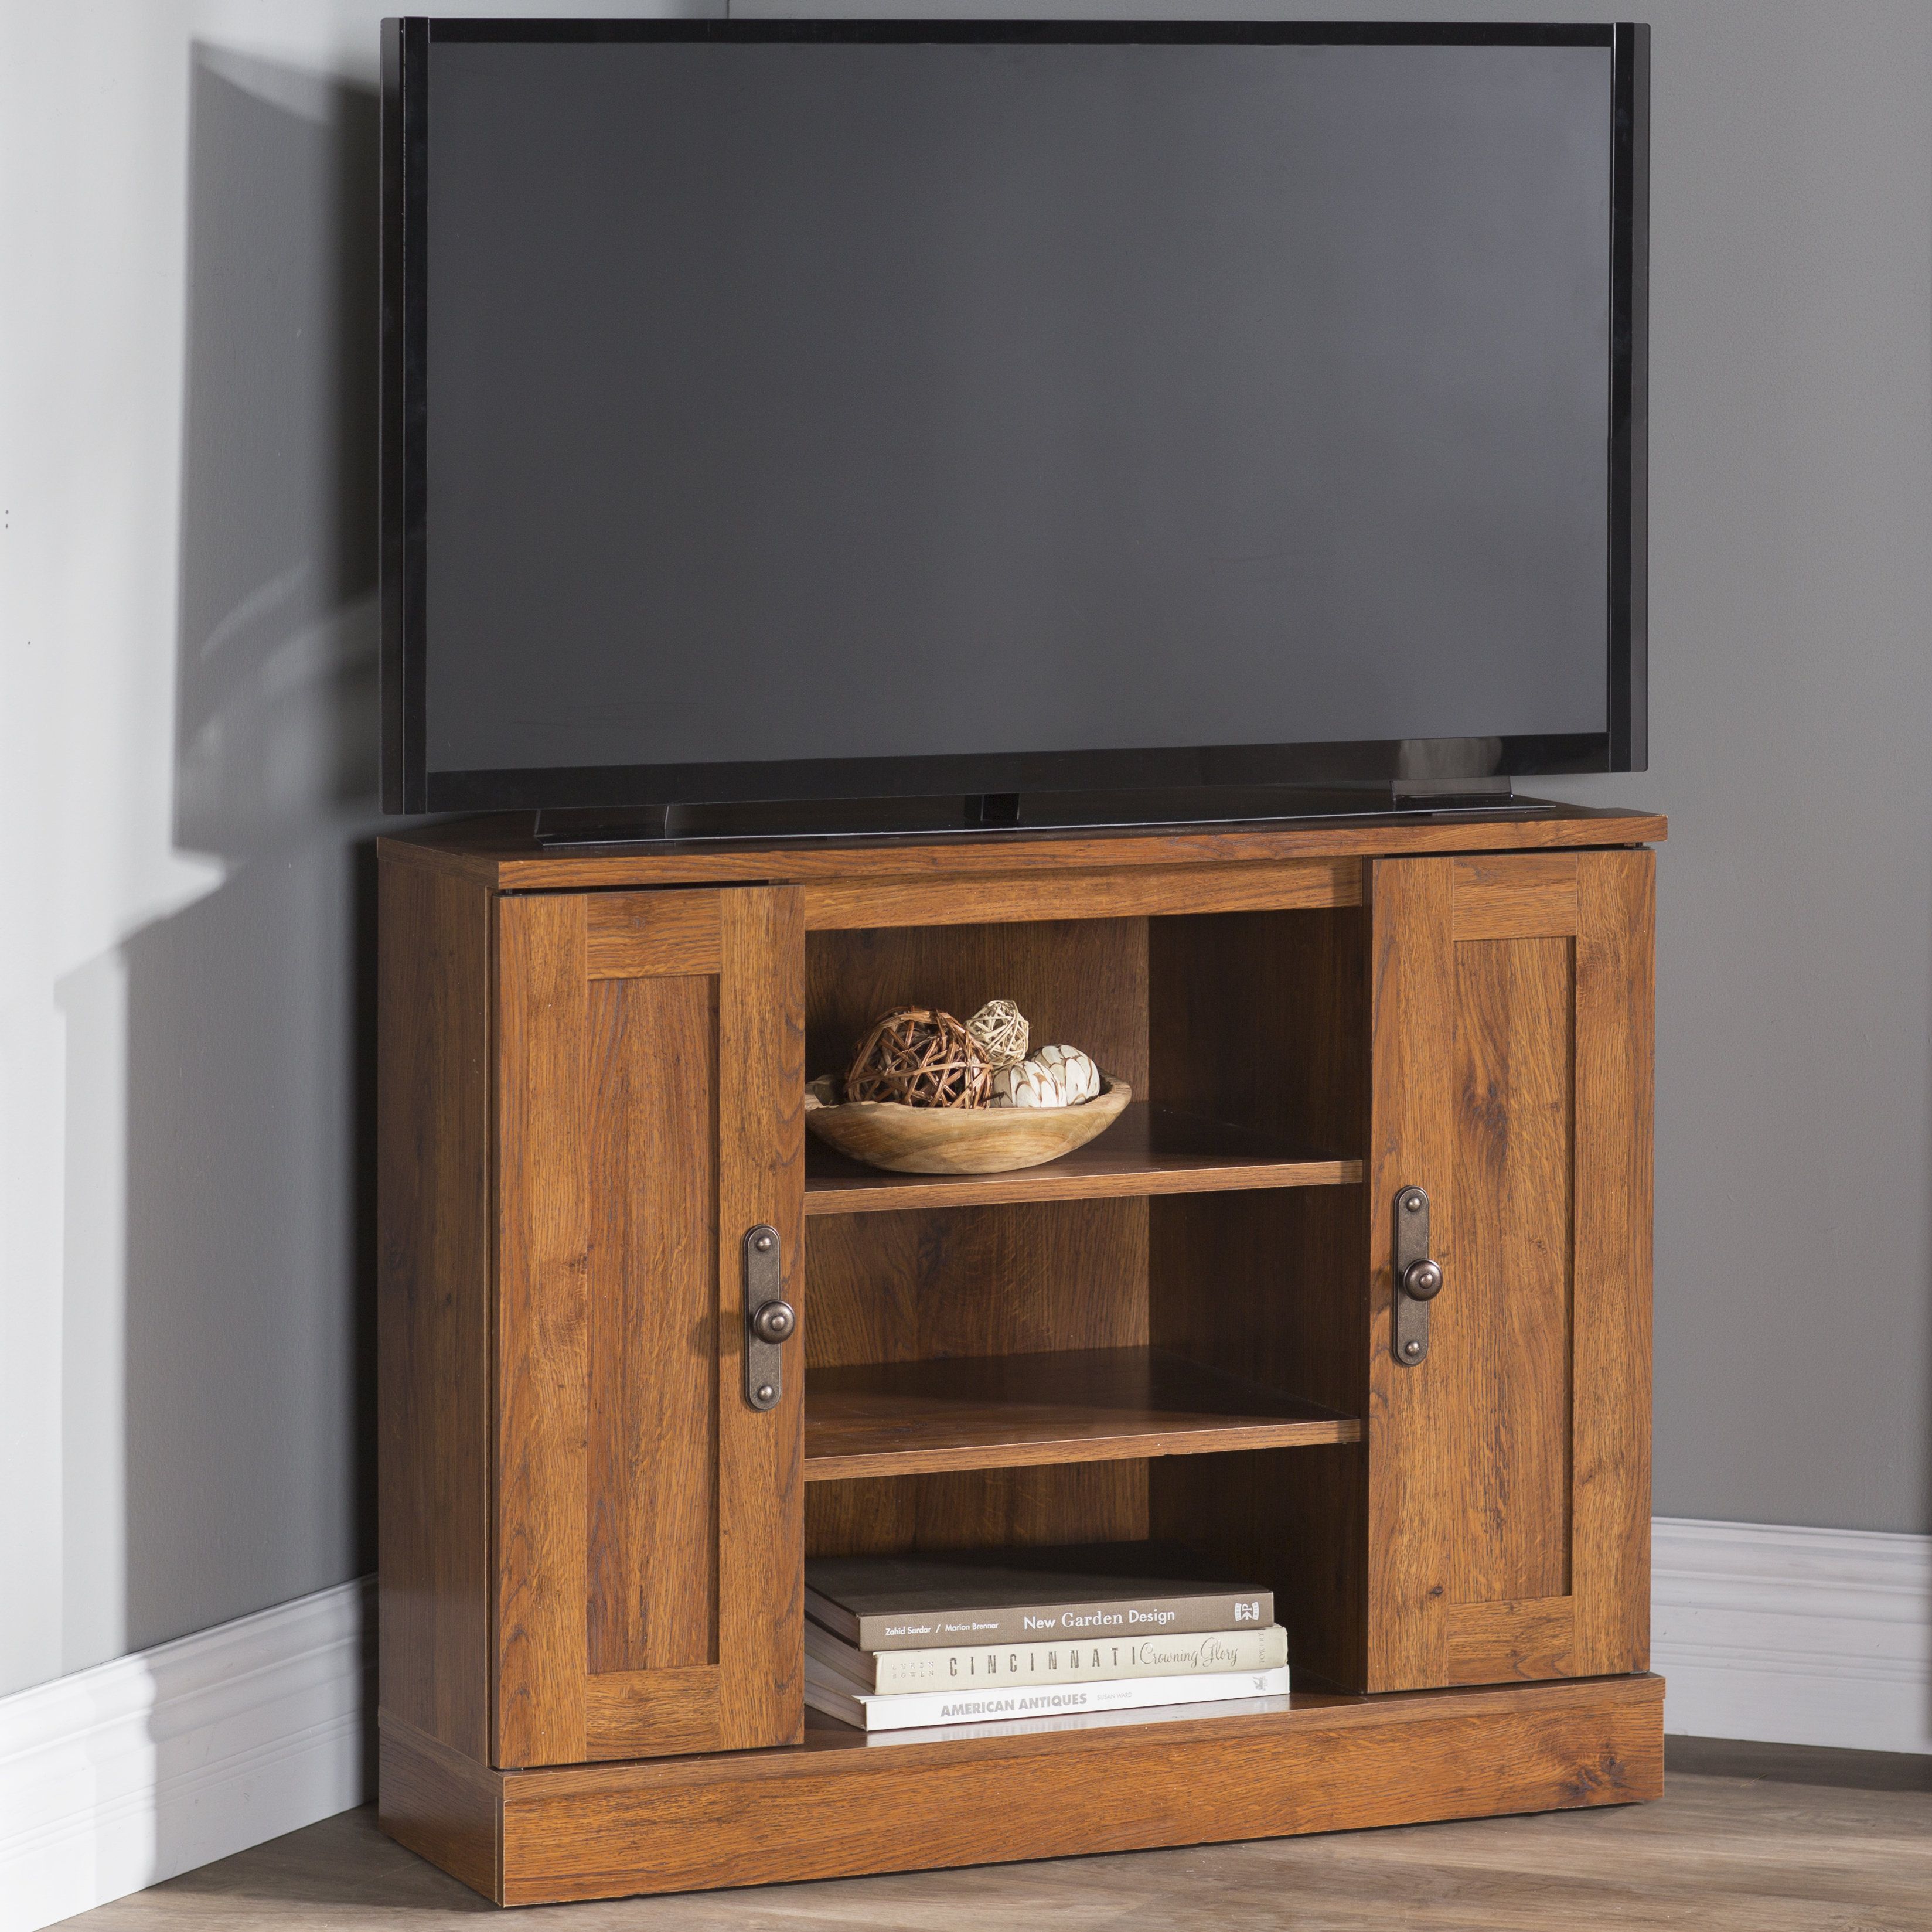 Tv Stands & Entertainment Centers | Wayfair (View 14 of 30)